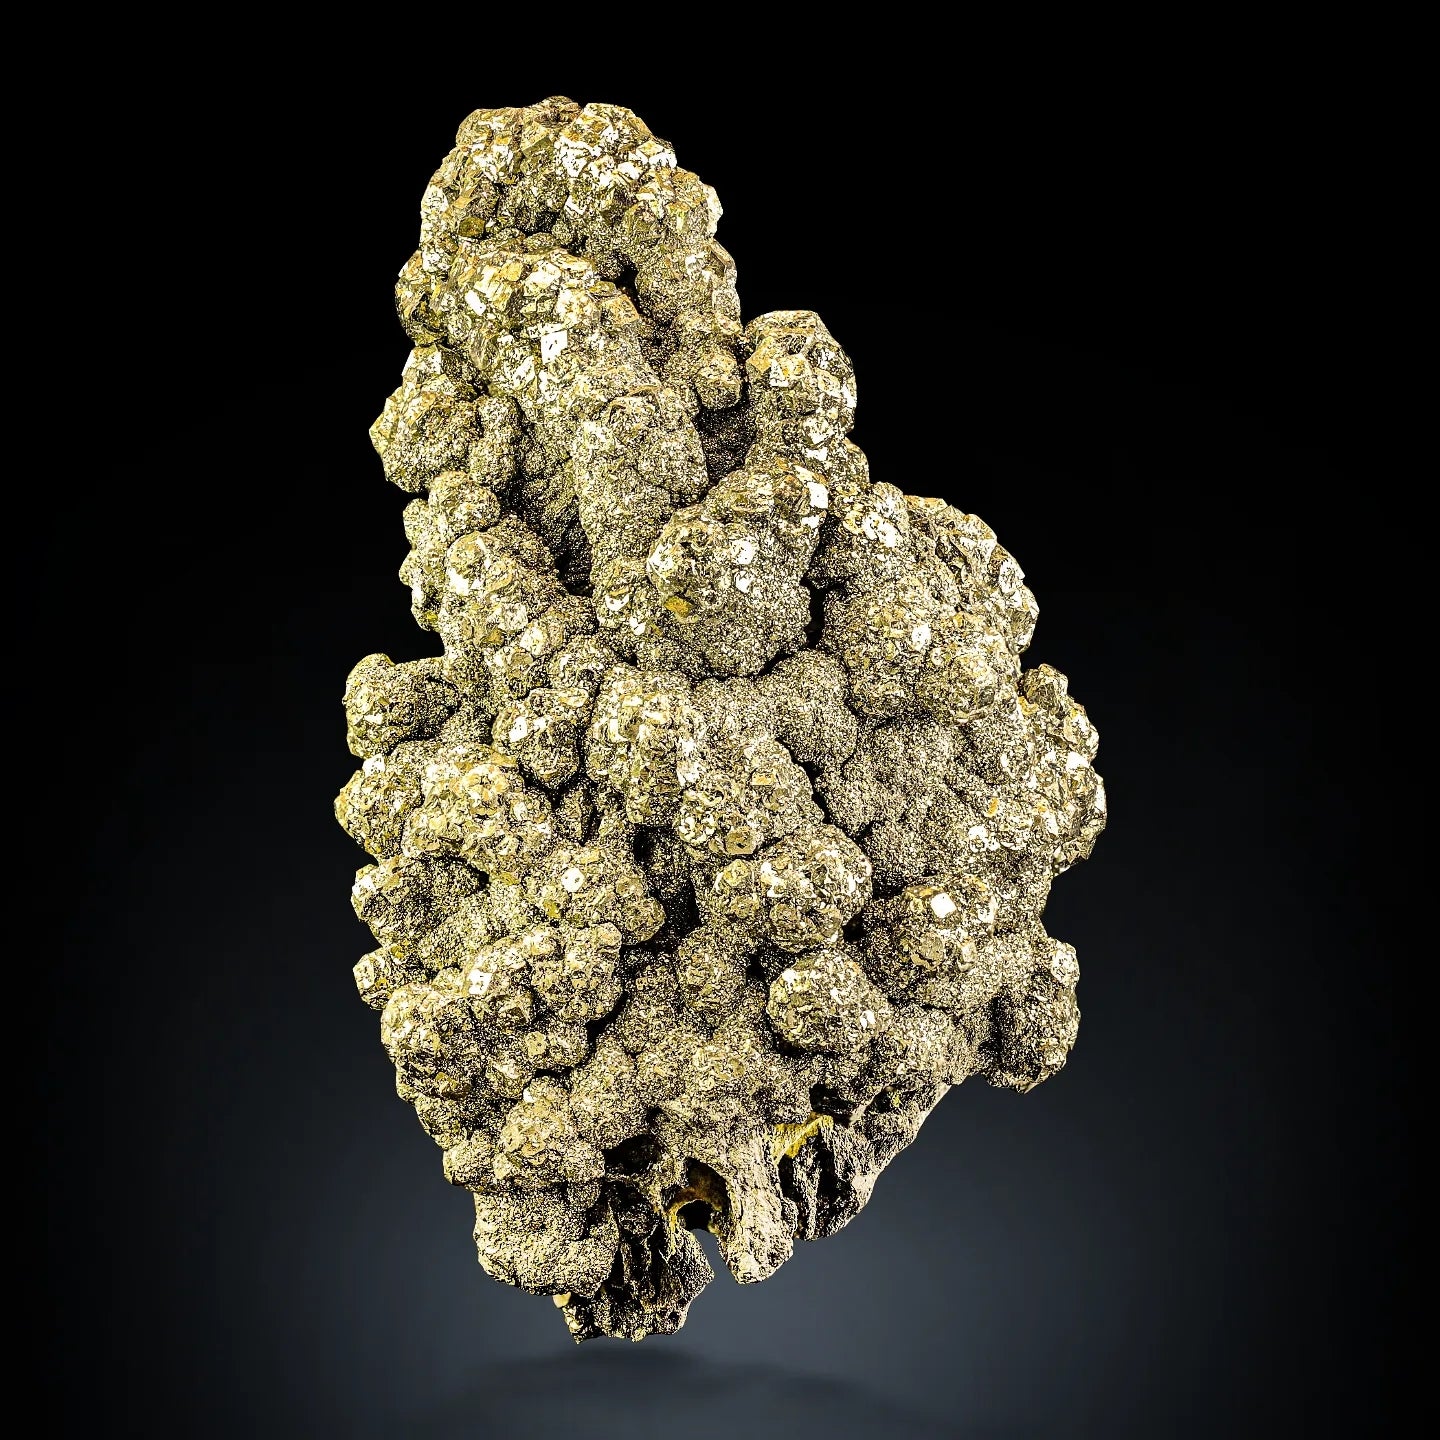 Unique Golden color Pyrite Crystals on Limonite Matrix from Afghanistan